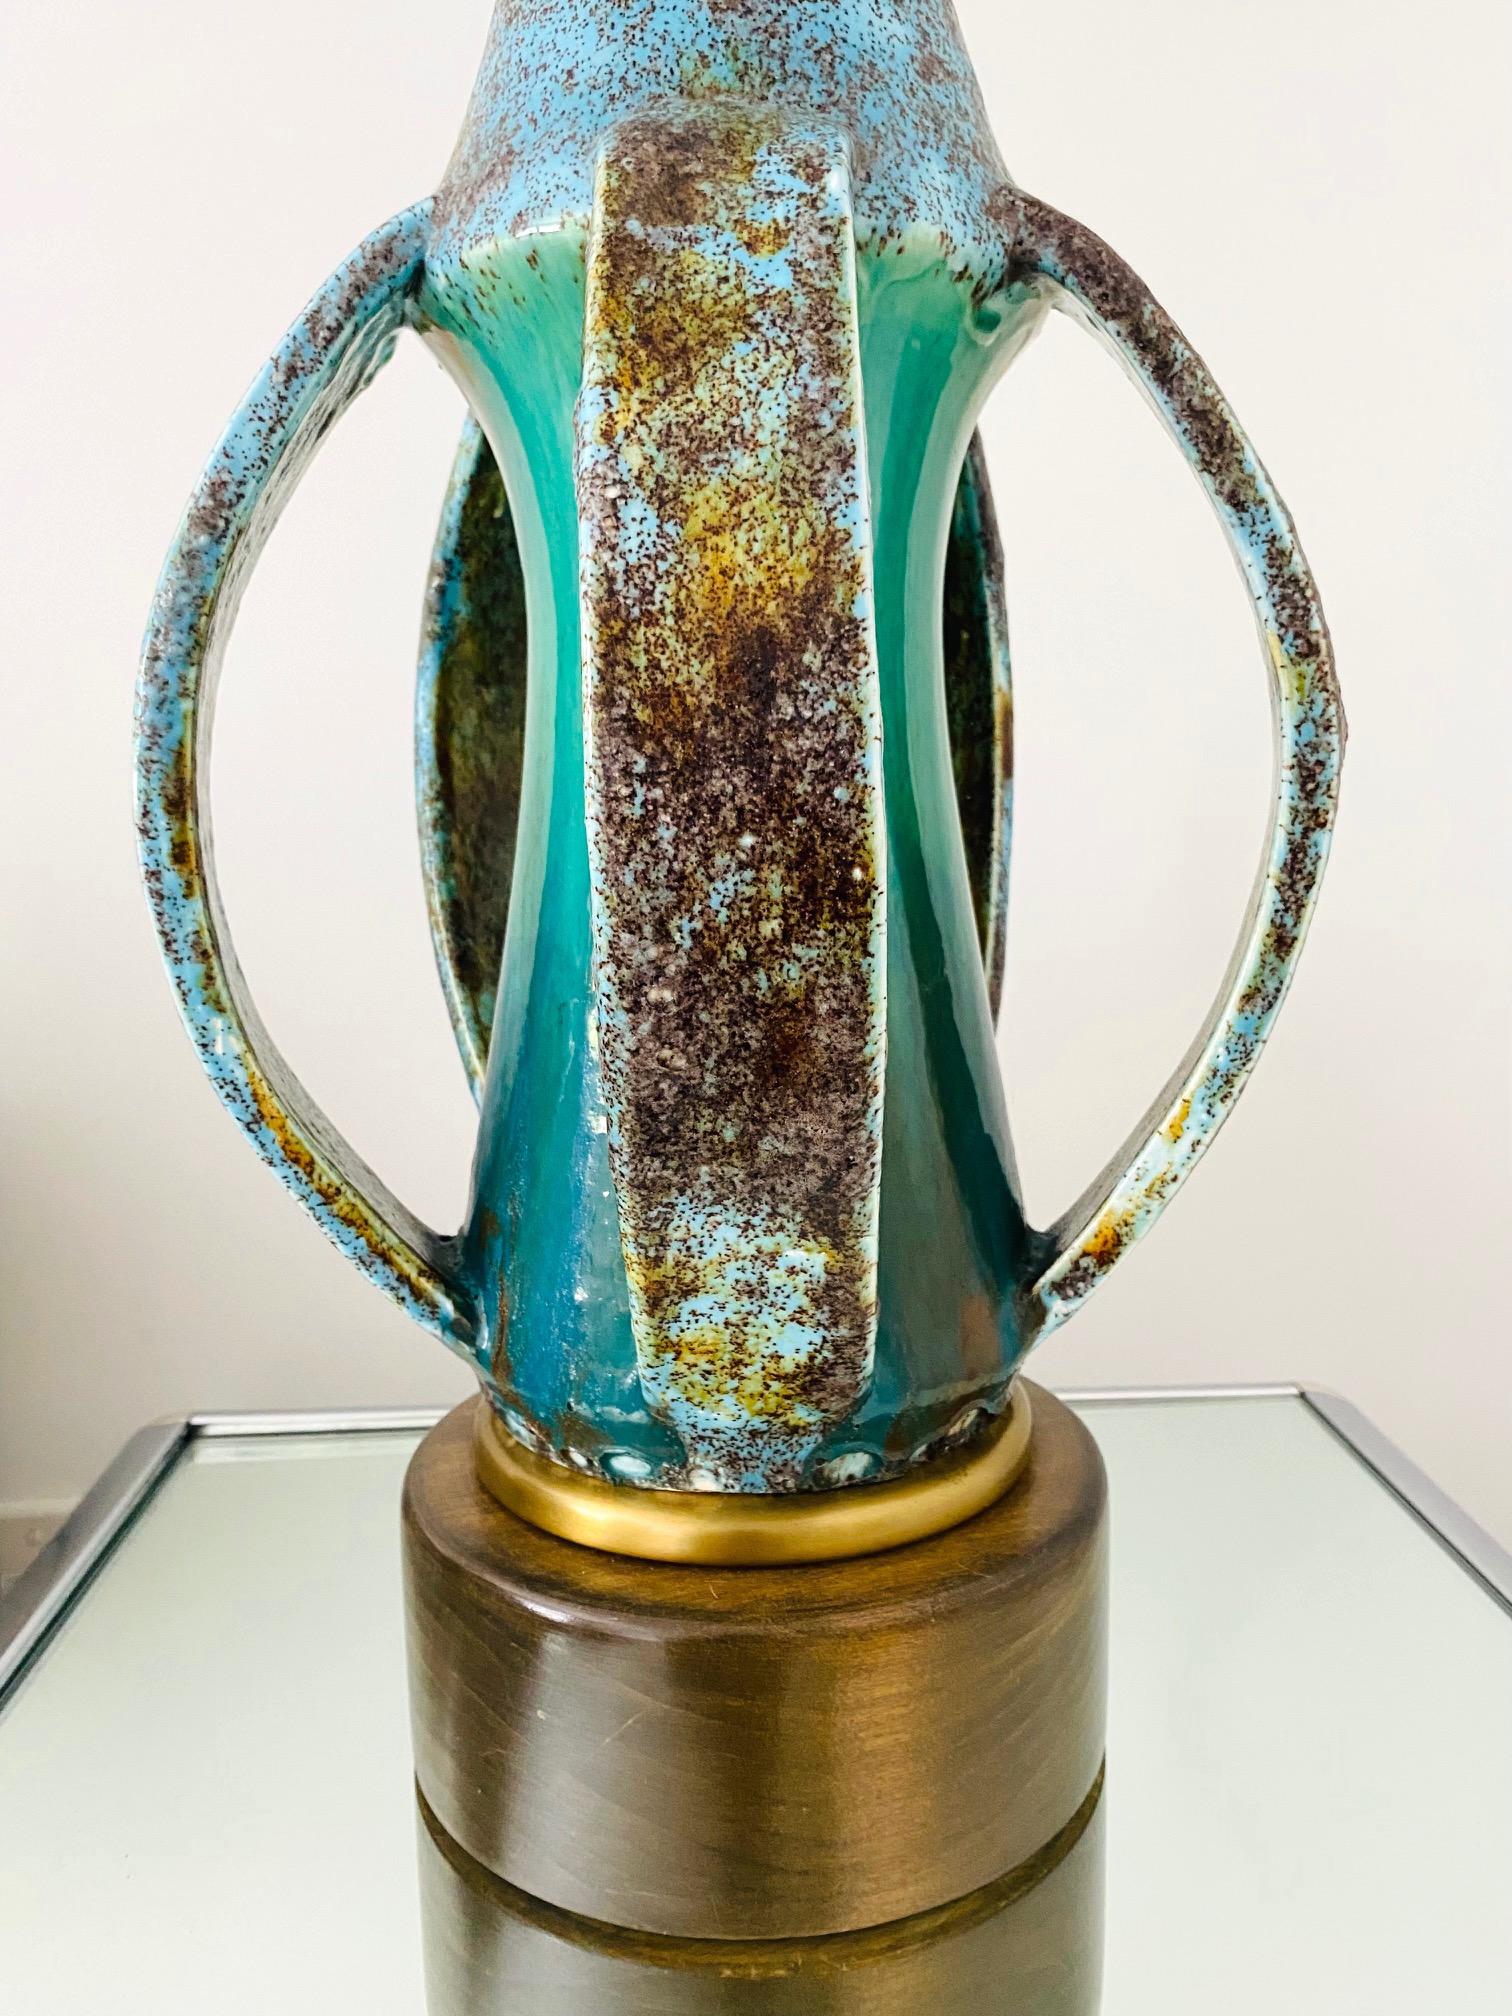 Mid-Century Modern Sculptural Pottery Lamp in Turquoise & Blue, Denmark C. 1960s In Good Condition For Sale In Fort Lauderdale, FL